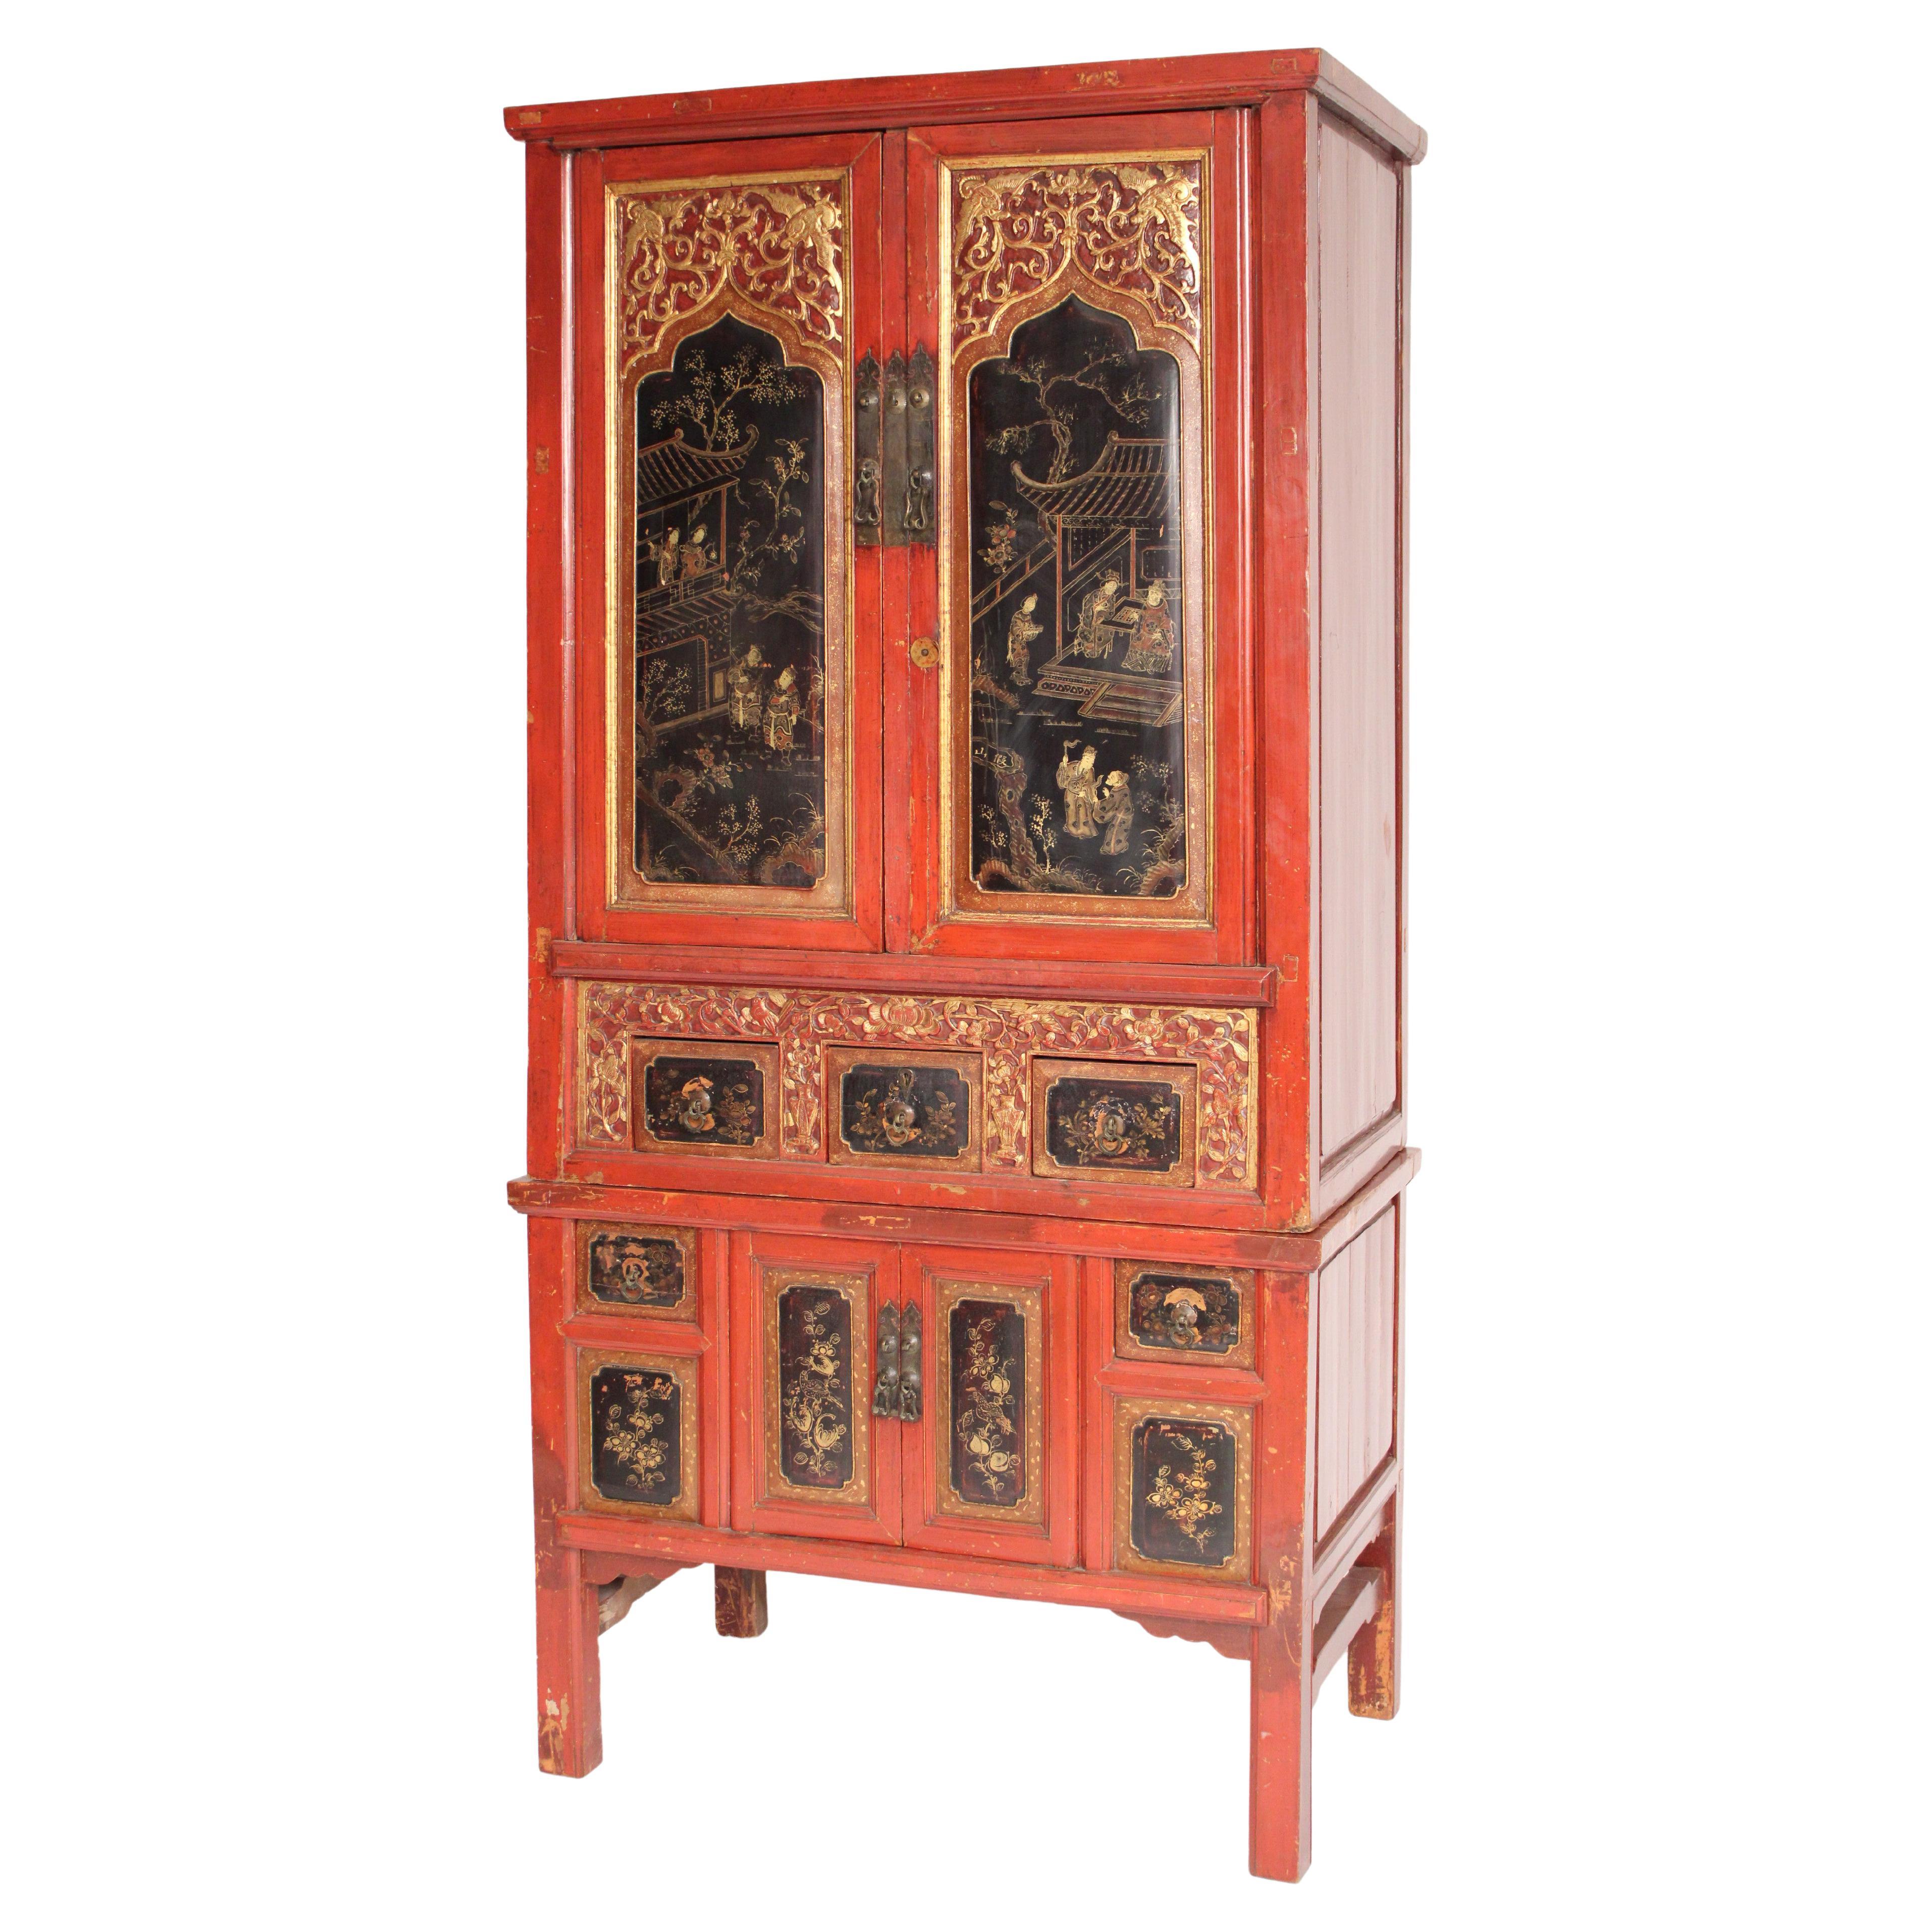 Chinese Red and Black Lacquer Chinoiserie Decorated Cabinet